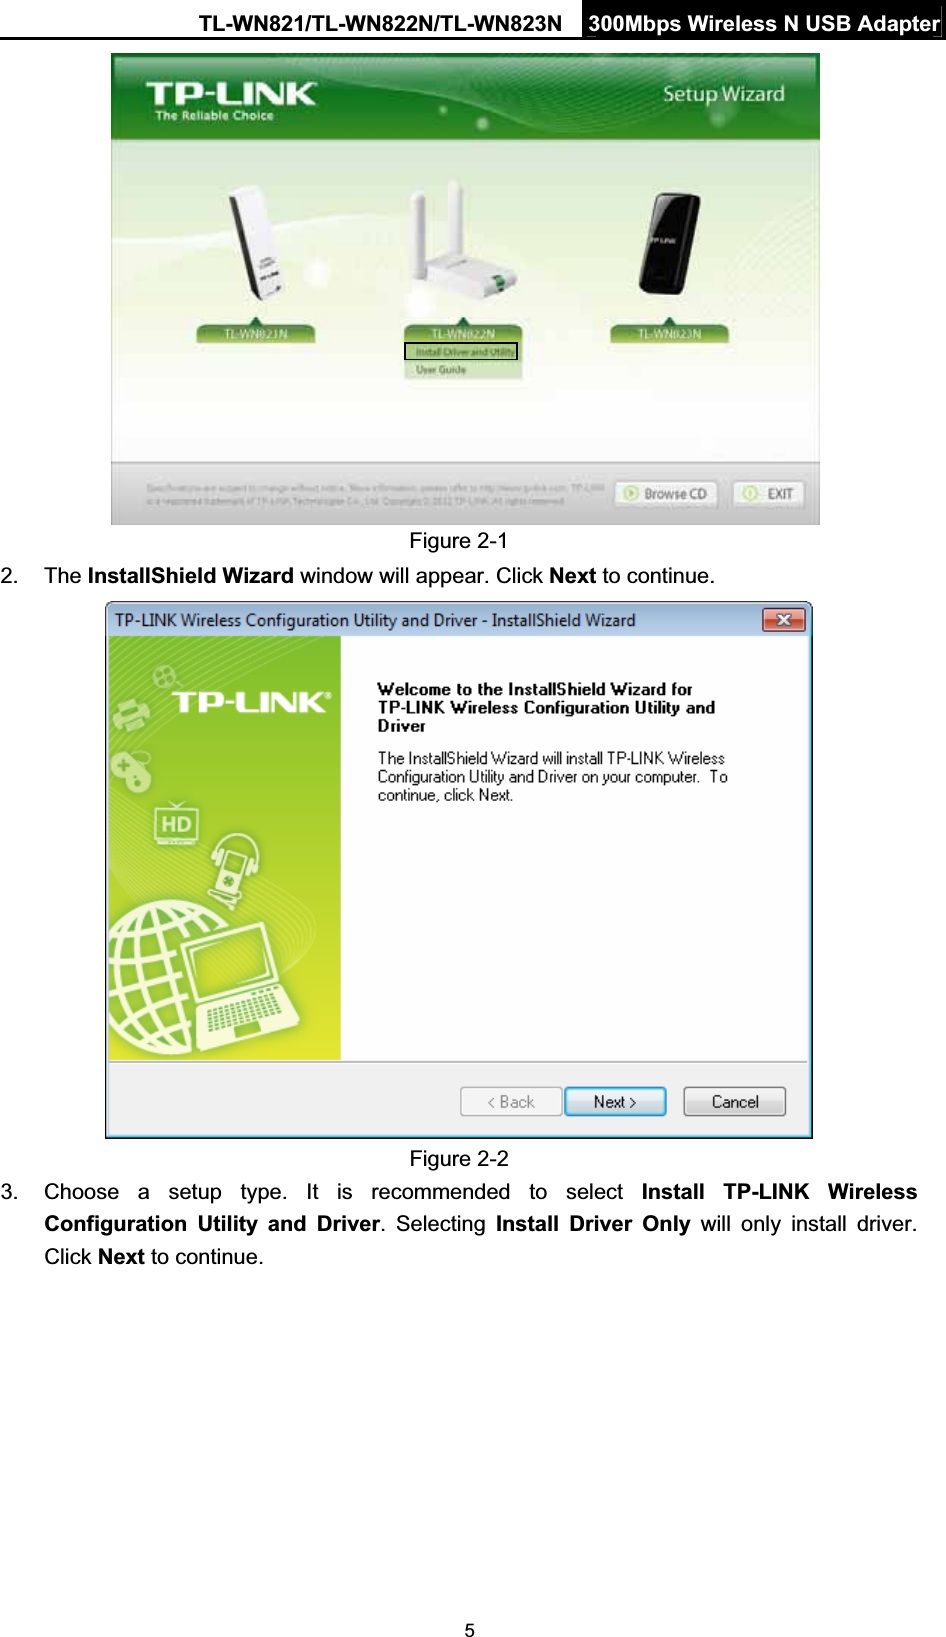 TL-WN821/TL-WN822N/TL-WN823N  300Mbps Wireless N USB Adapter5Figure 2-1 2. The InstallShield Wizard window will appear. Click Next to continue. Figure 2-2 3.  Choose a setup type. It is recommended to select Install TP-LINK Wireless Configuration Utility and Driver. Selecting Install Driver Only will only install driver. Click Next to continue. 